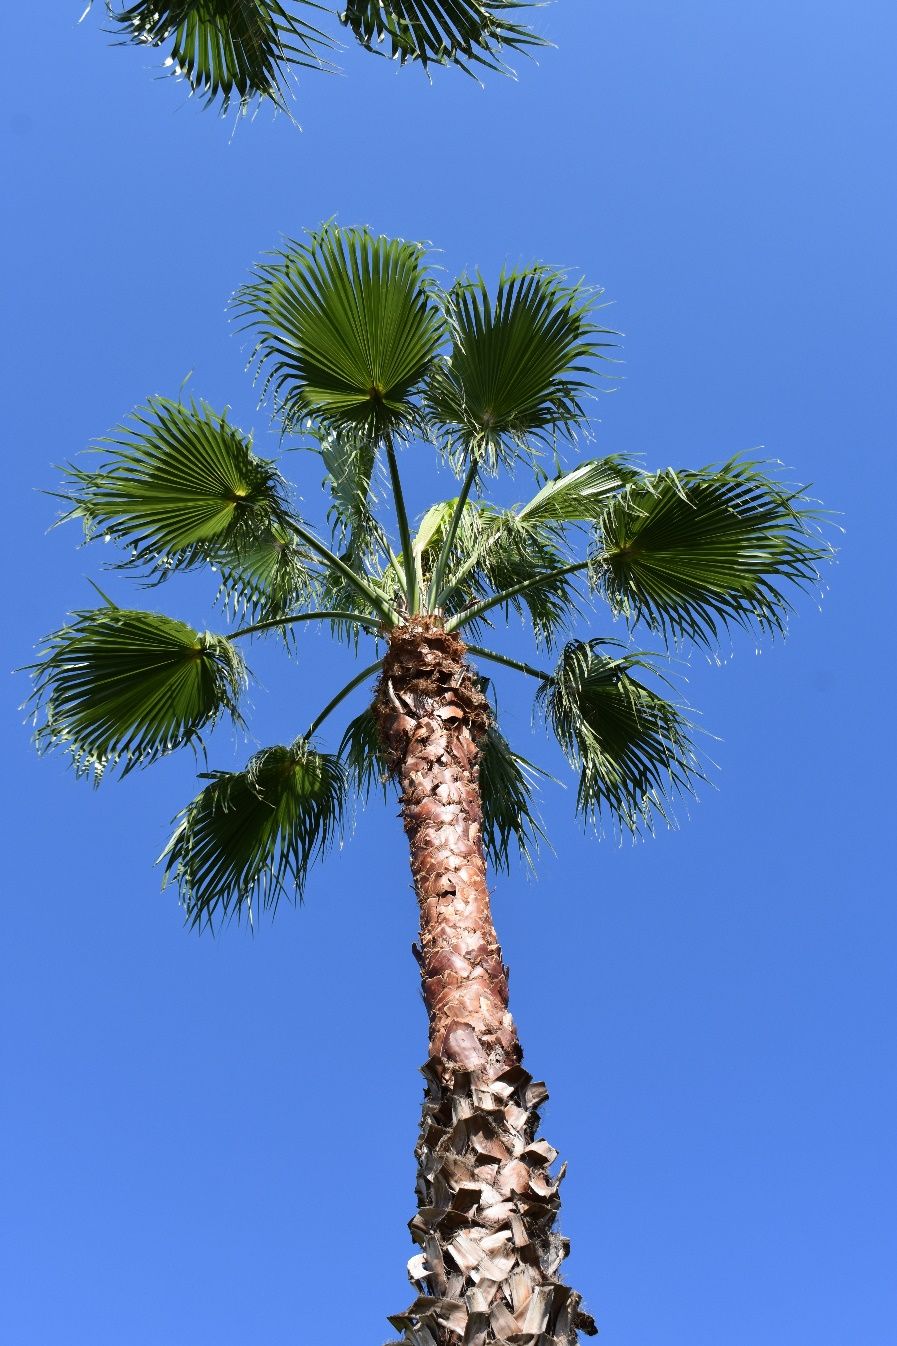 A typical Washingtonia robusta with less than a full 360° canopy. Leaf bases are being shed.